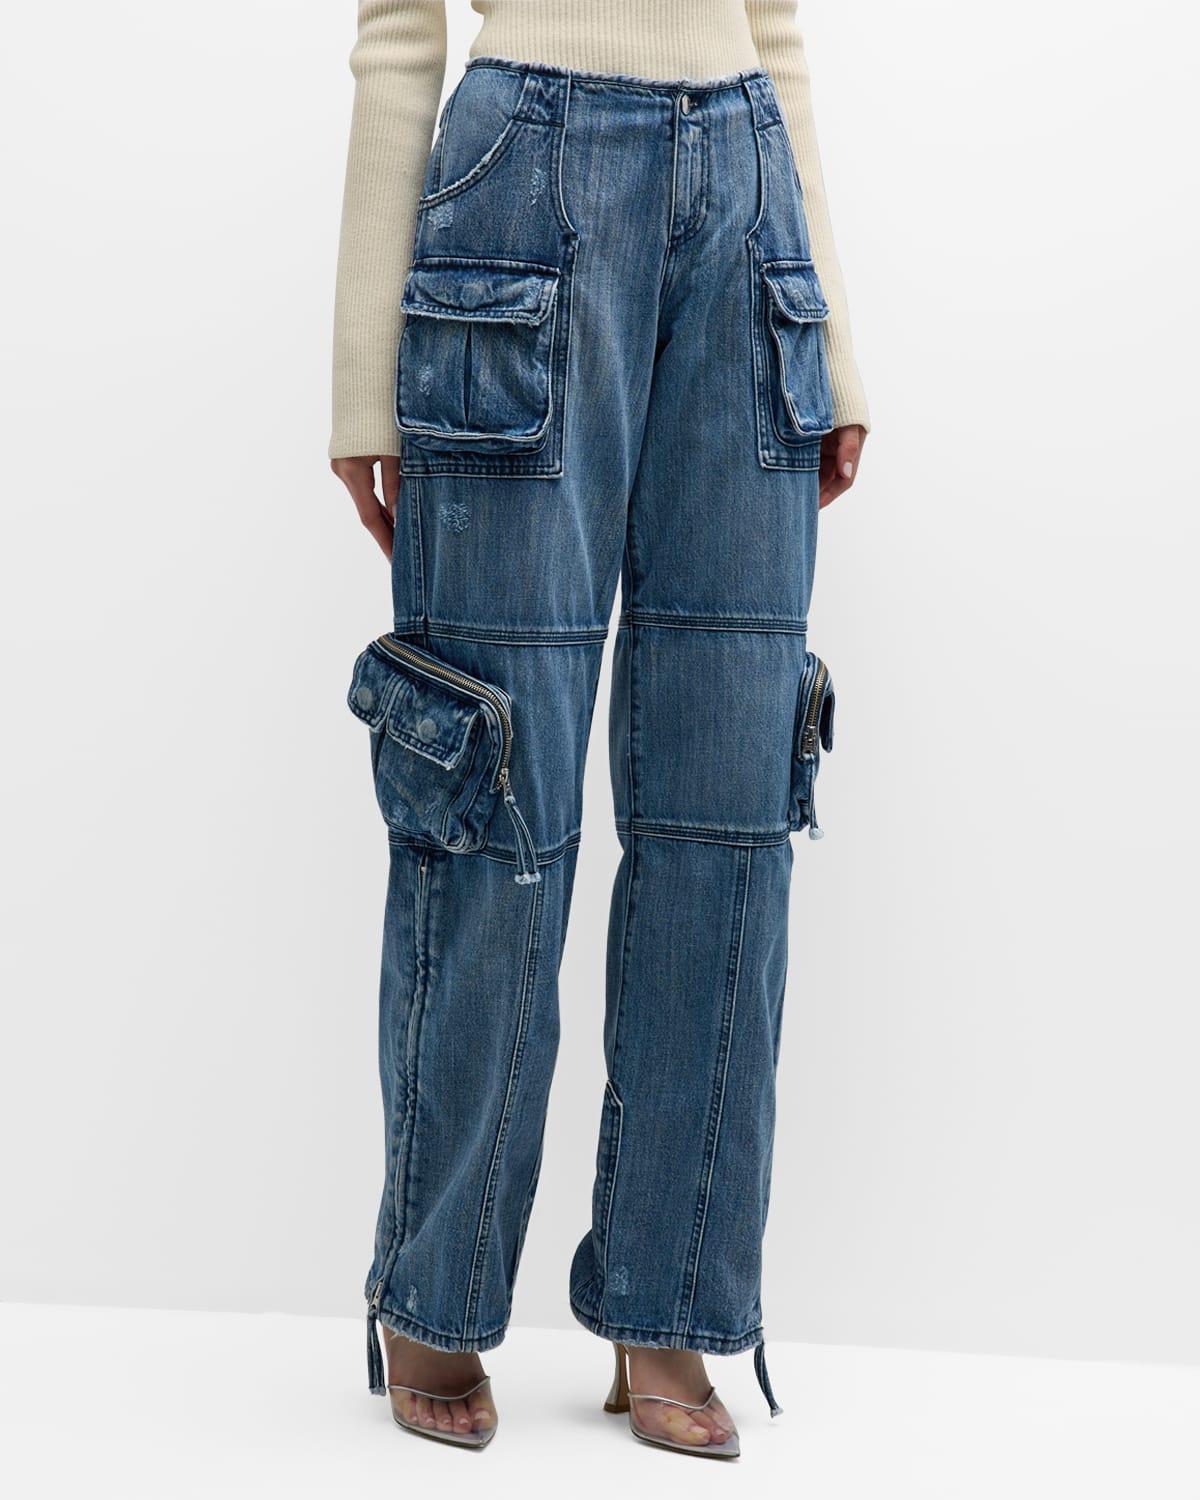 Tammy Low-Rise Zip-Cuff Cargo Denim Jeans Product Image